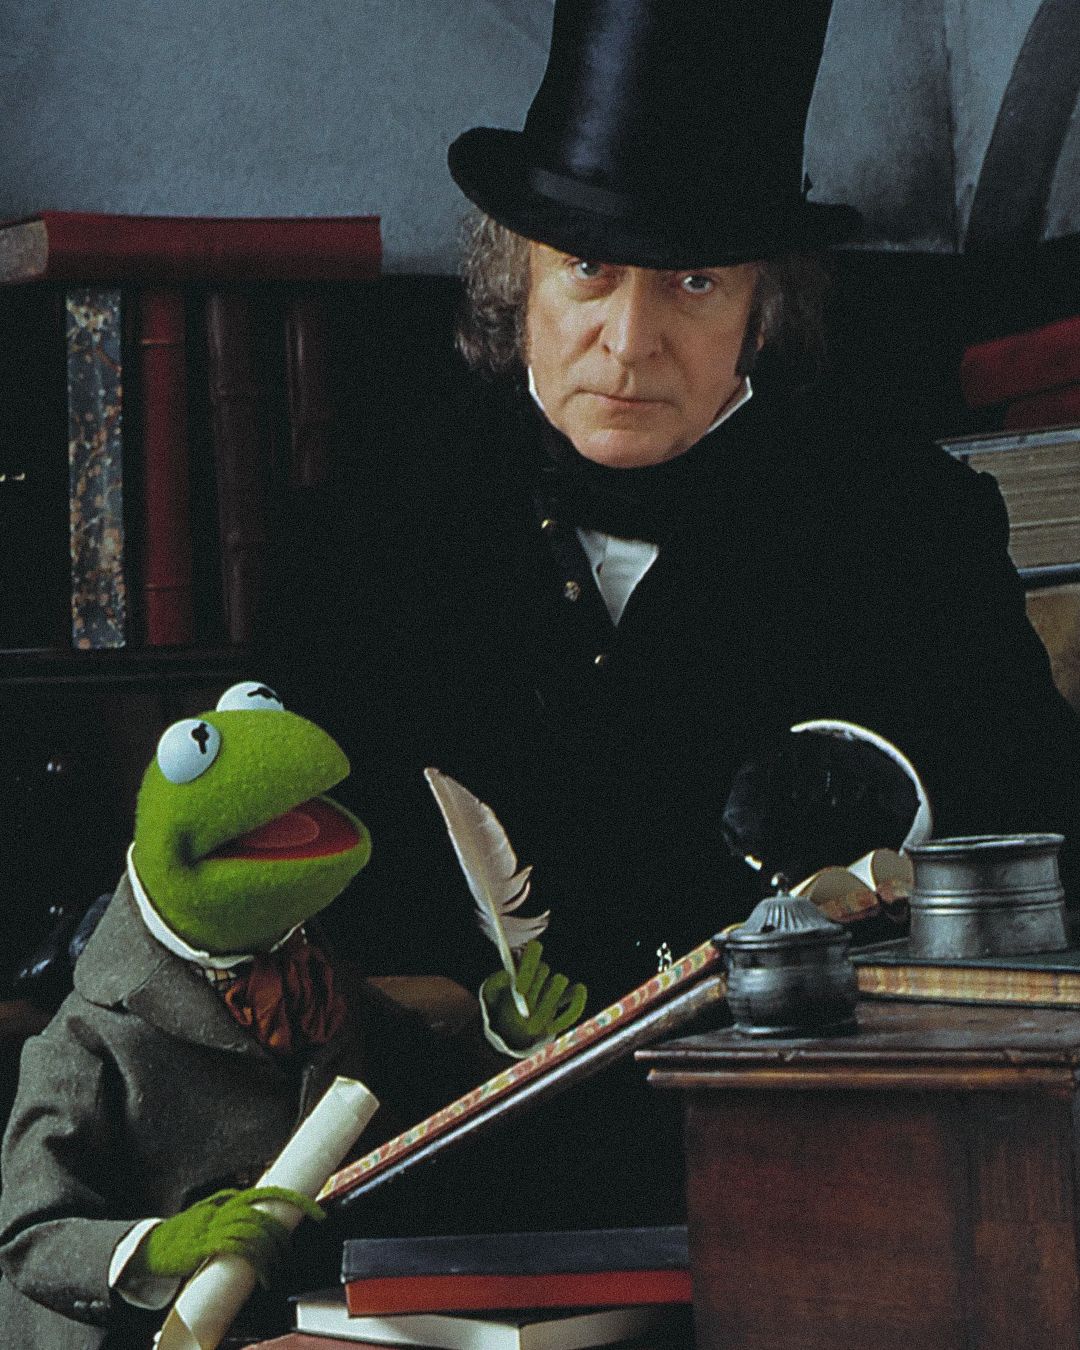 #135 - The Muppet Christmas Carol - Bringing Humor and Music to a Timeless Classic